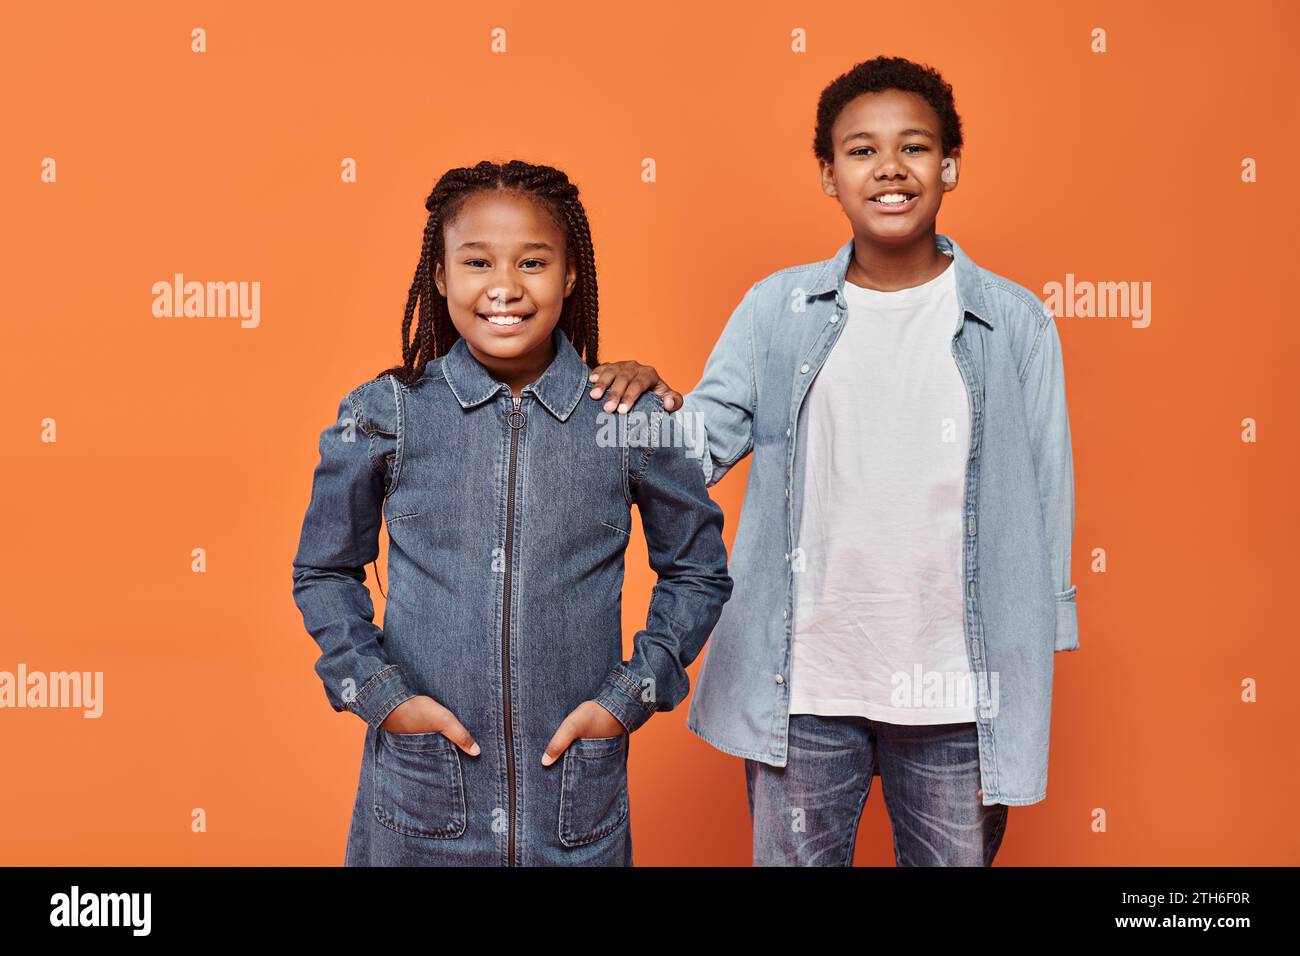 happy african american girl in casual denim attire posing together with boy on orange background Stock Photo